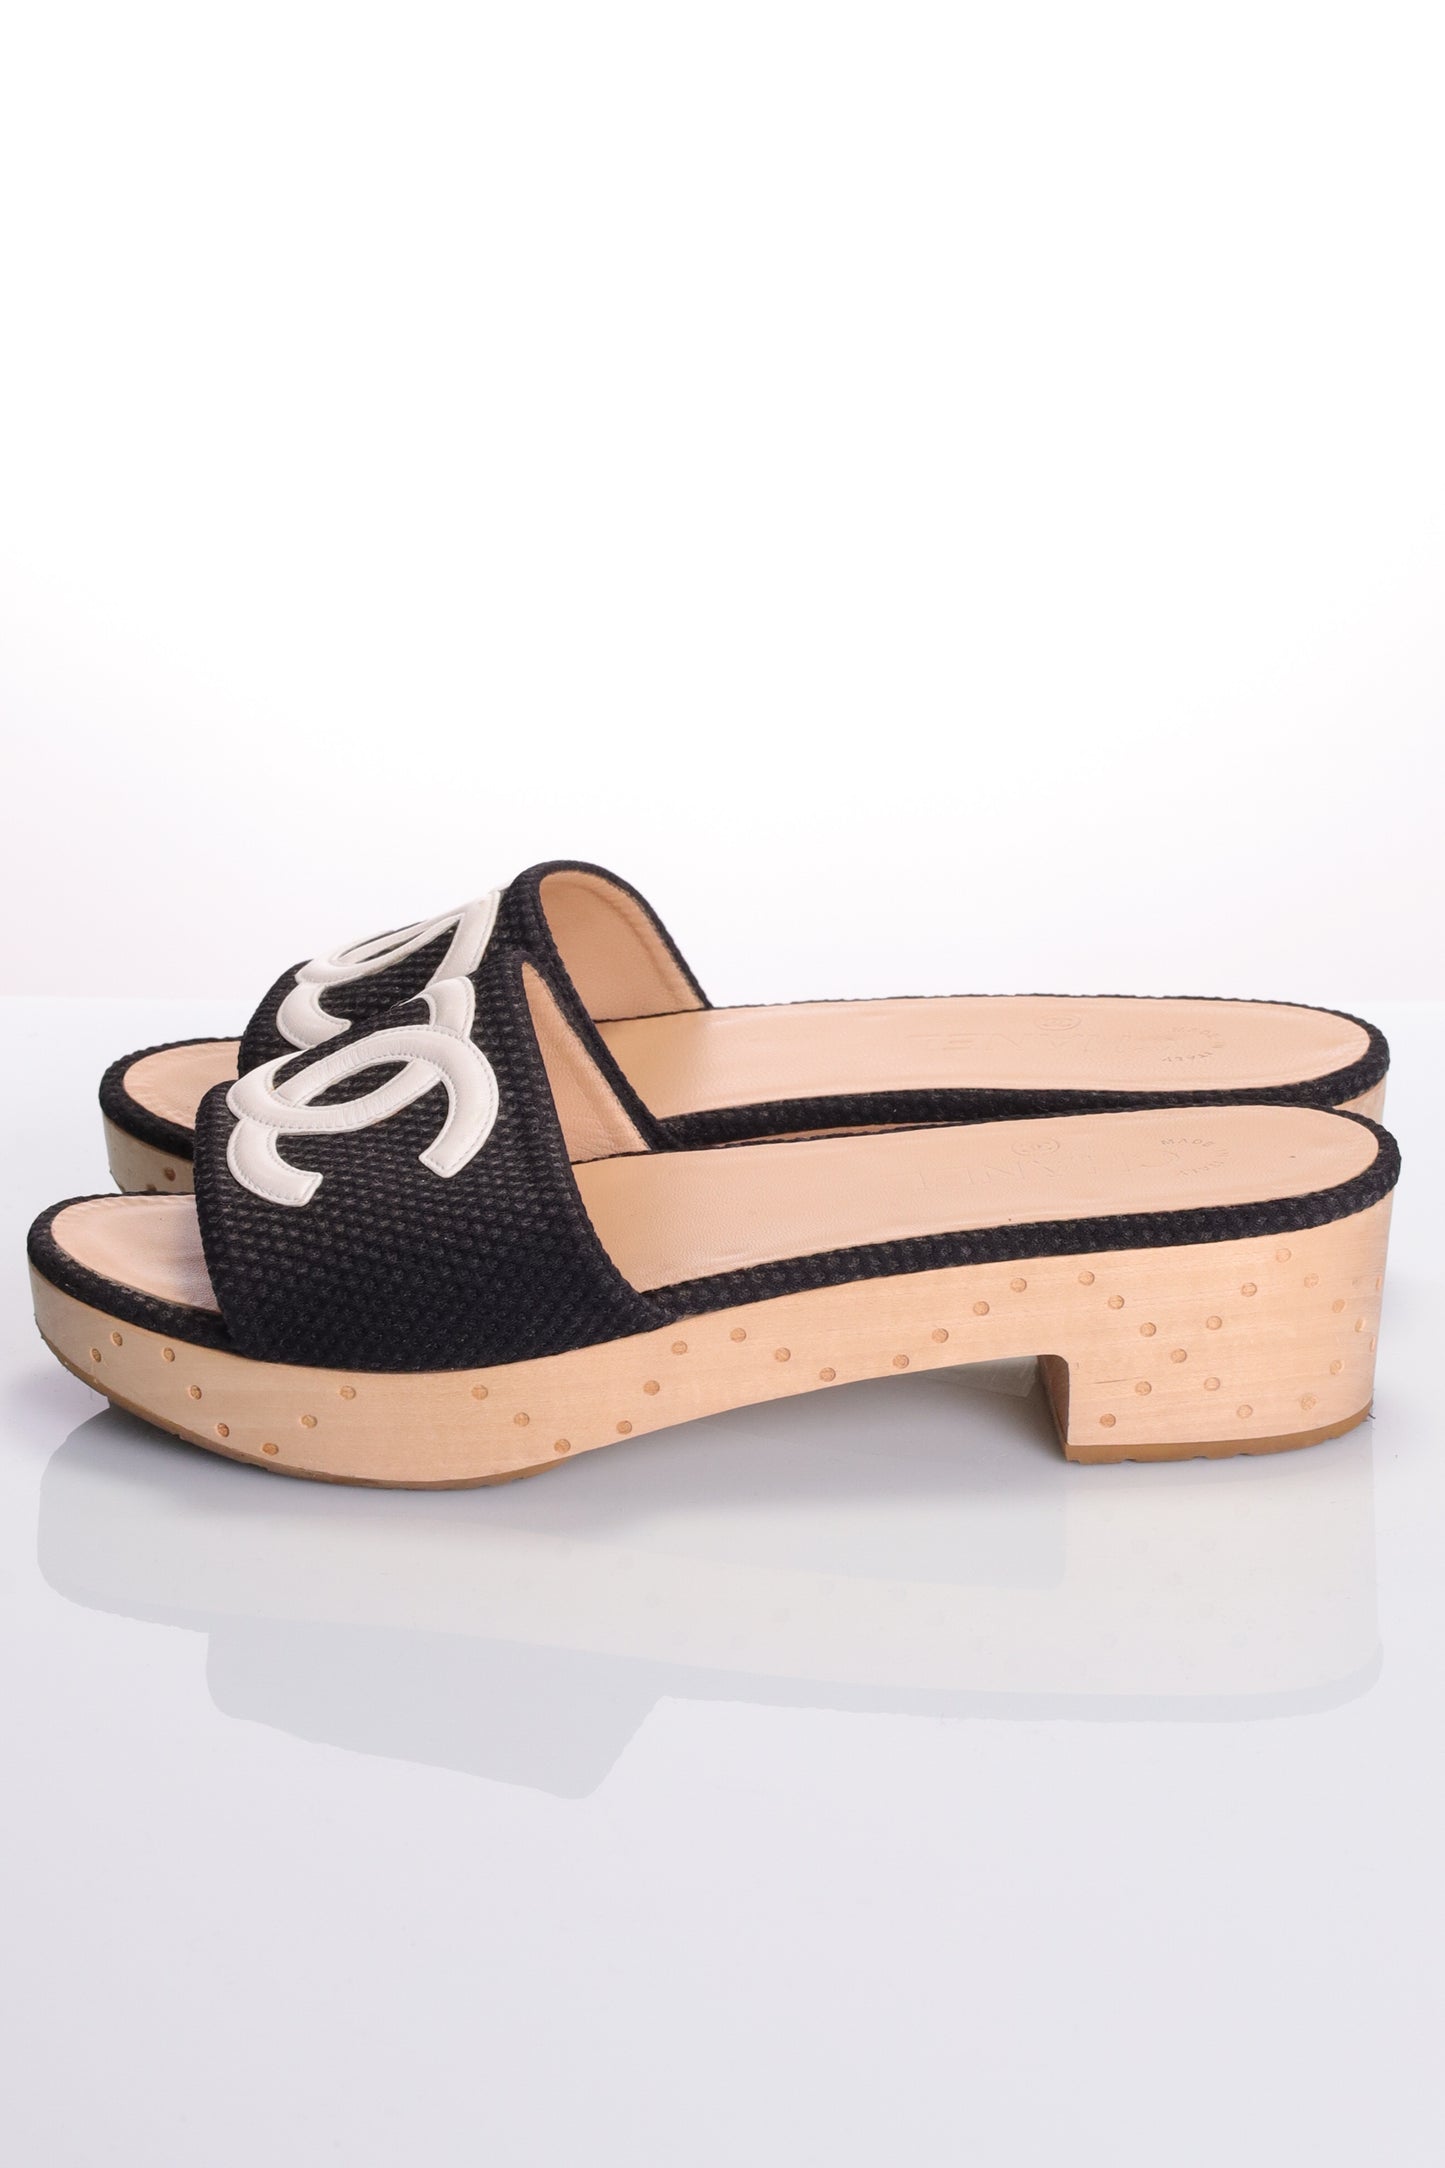 CHANEL MULES size. 41 CHA NEL Sandals G27145 Mules